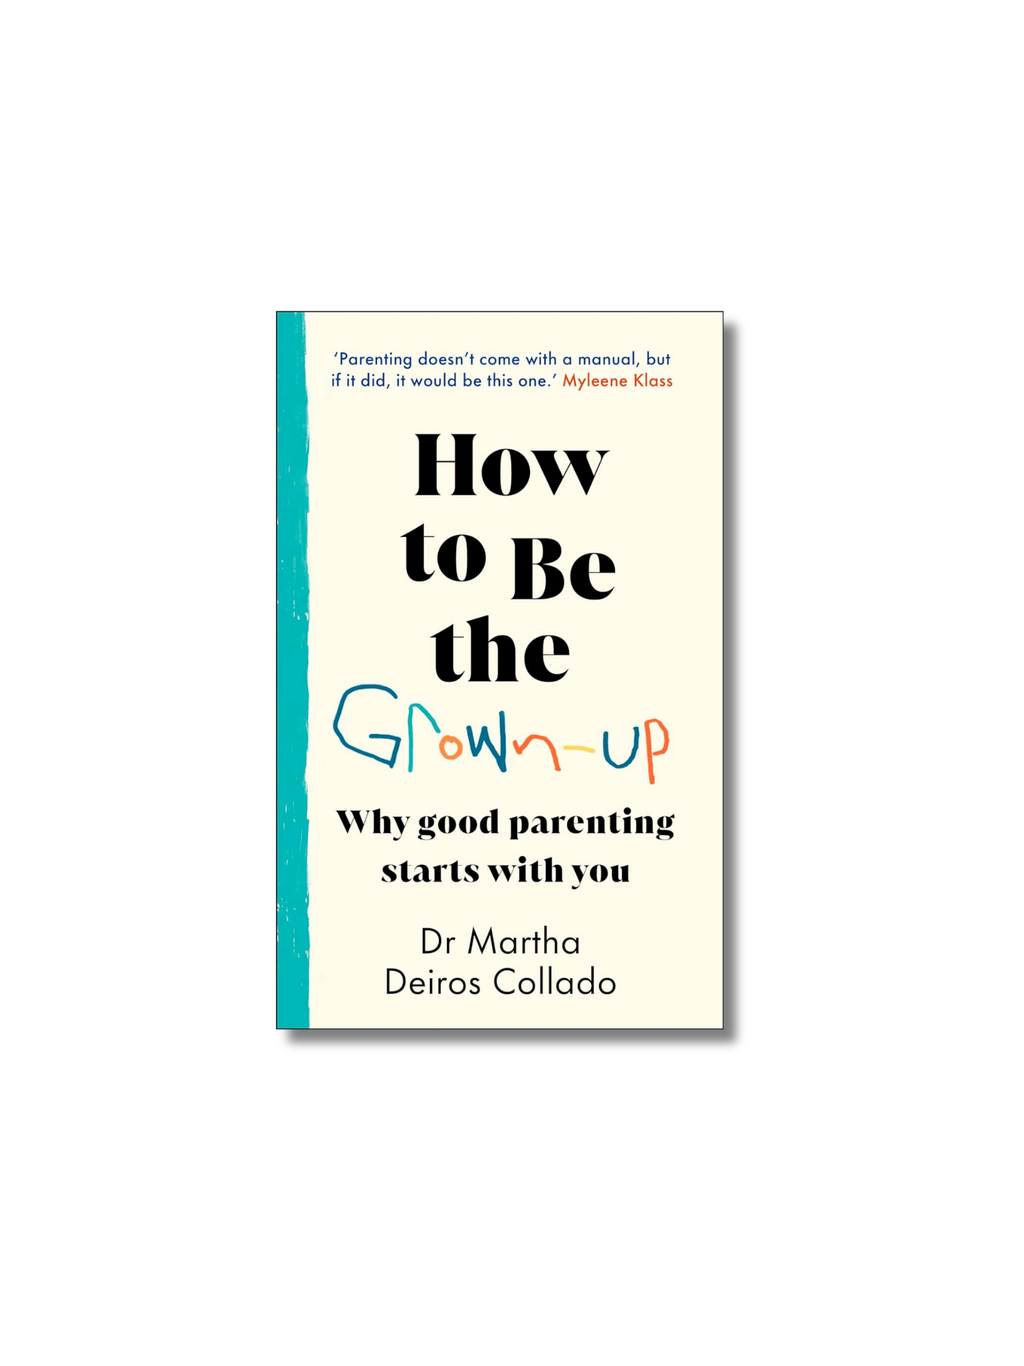 How to Be The Grown-Up: Why Good Parenting Starts with You